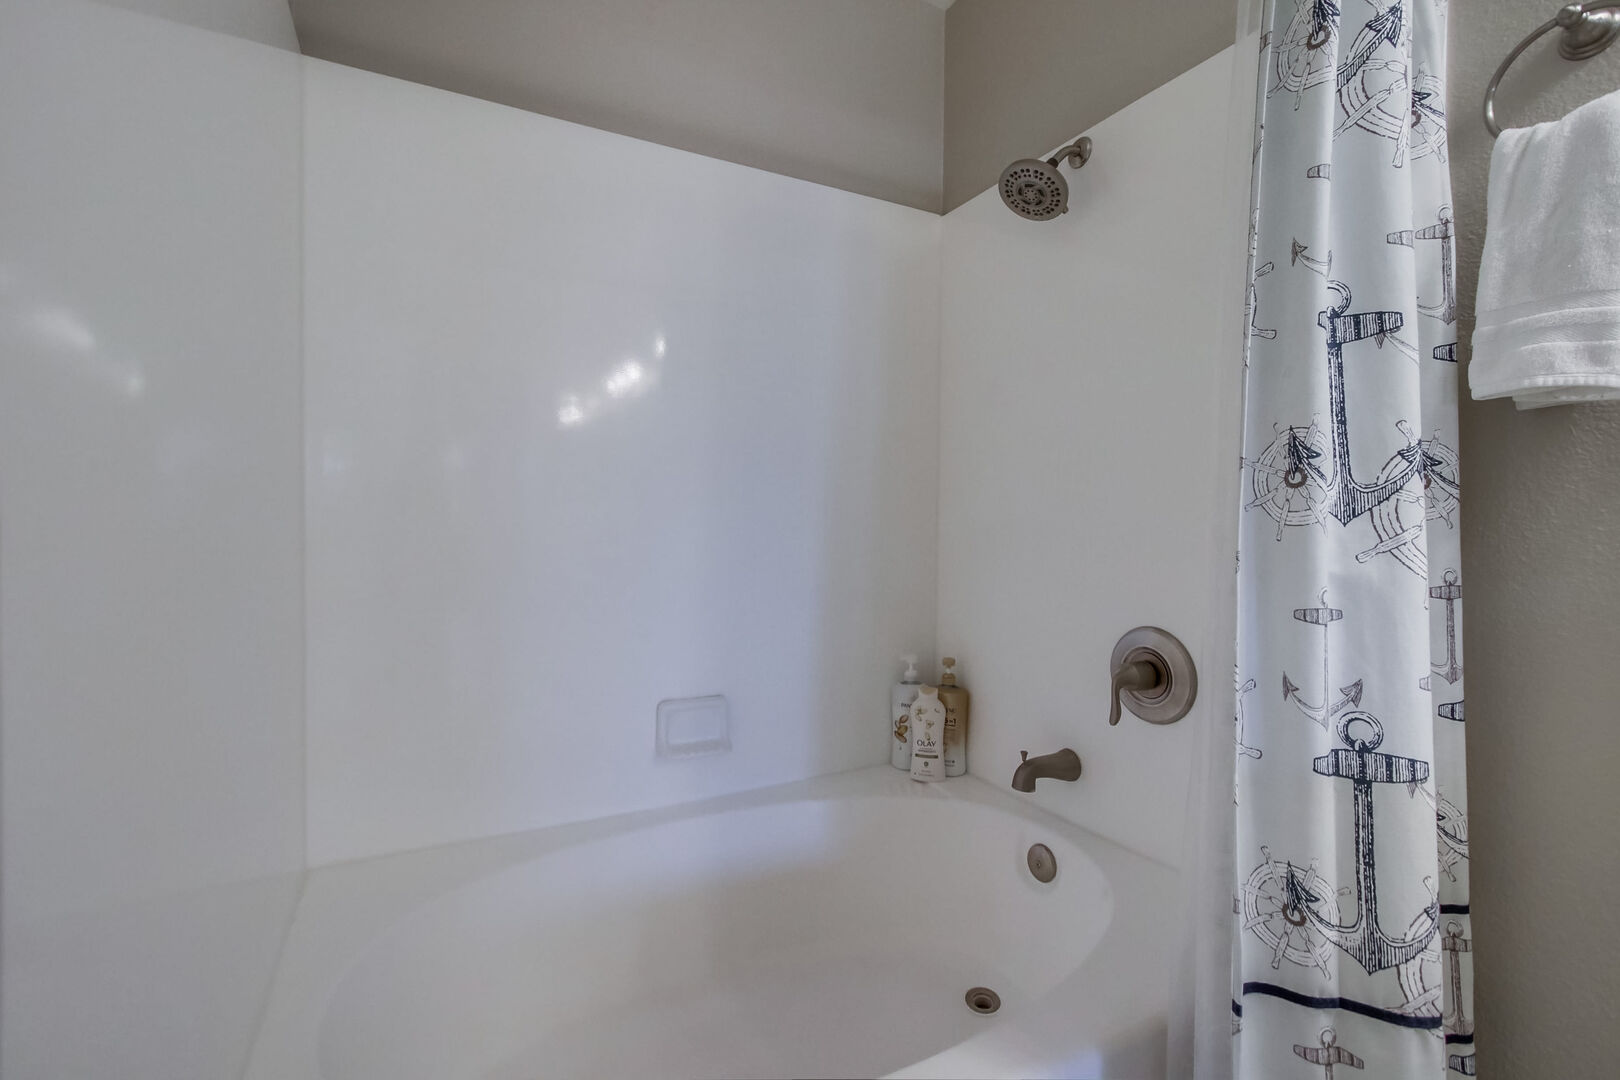 Shared bathroom with shower/ soaking tub, dual vanity, toilet, recessed lighting and storage cabinets